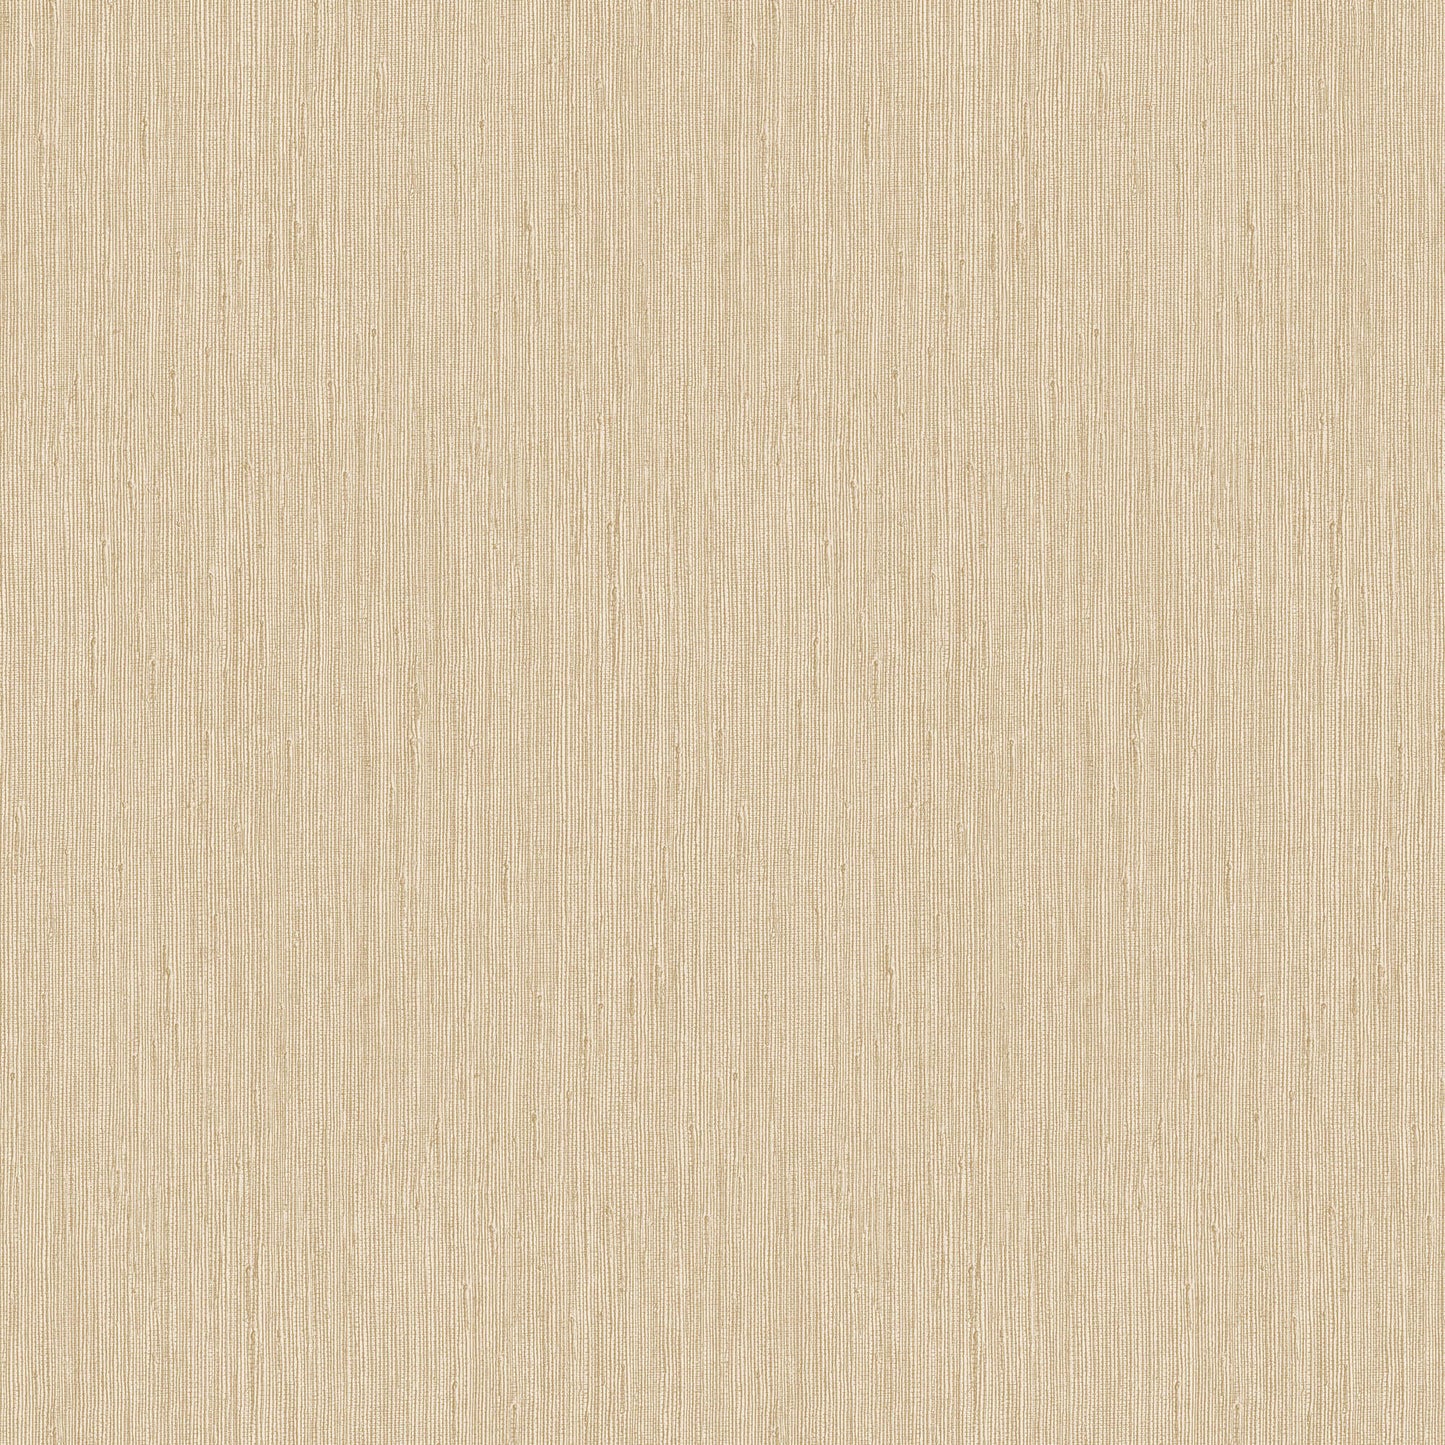 Seagrass Wallpaper - SAMPLE ONLY